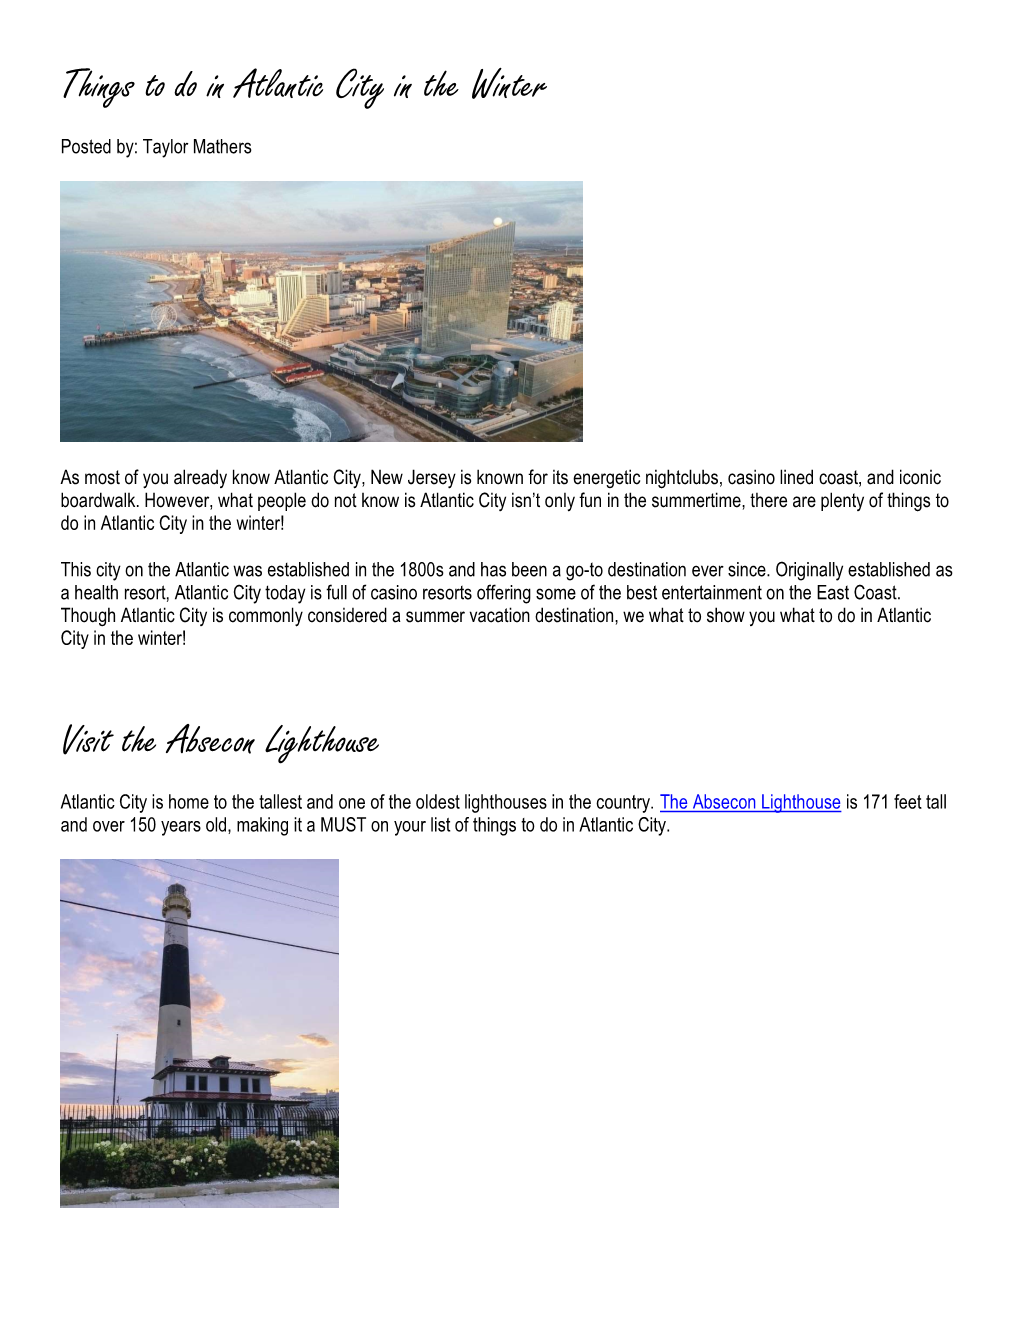 Things to Do in Atlantic City in the Winter Visit the Absecon Lighthouse